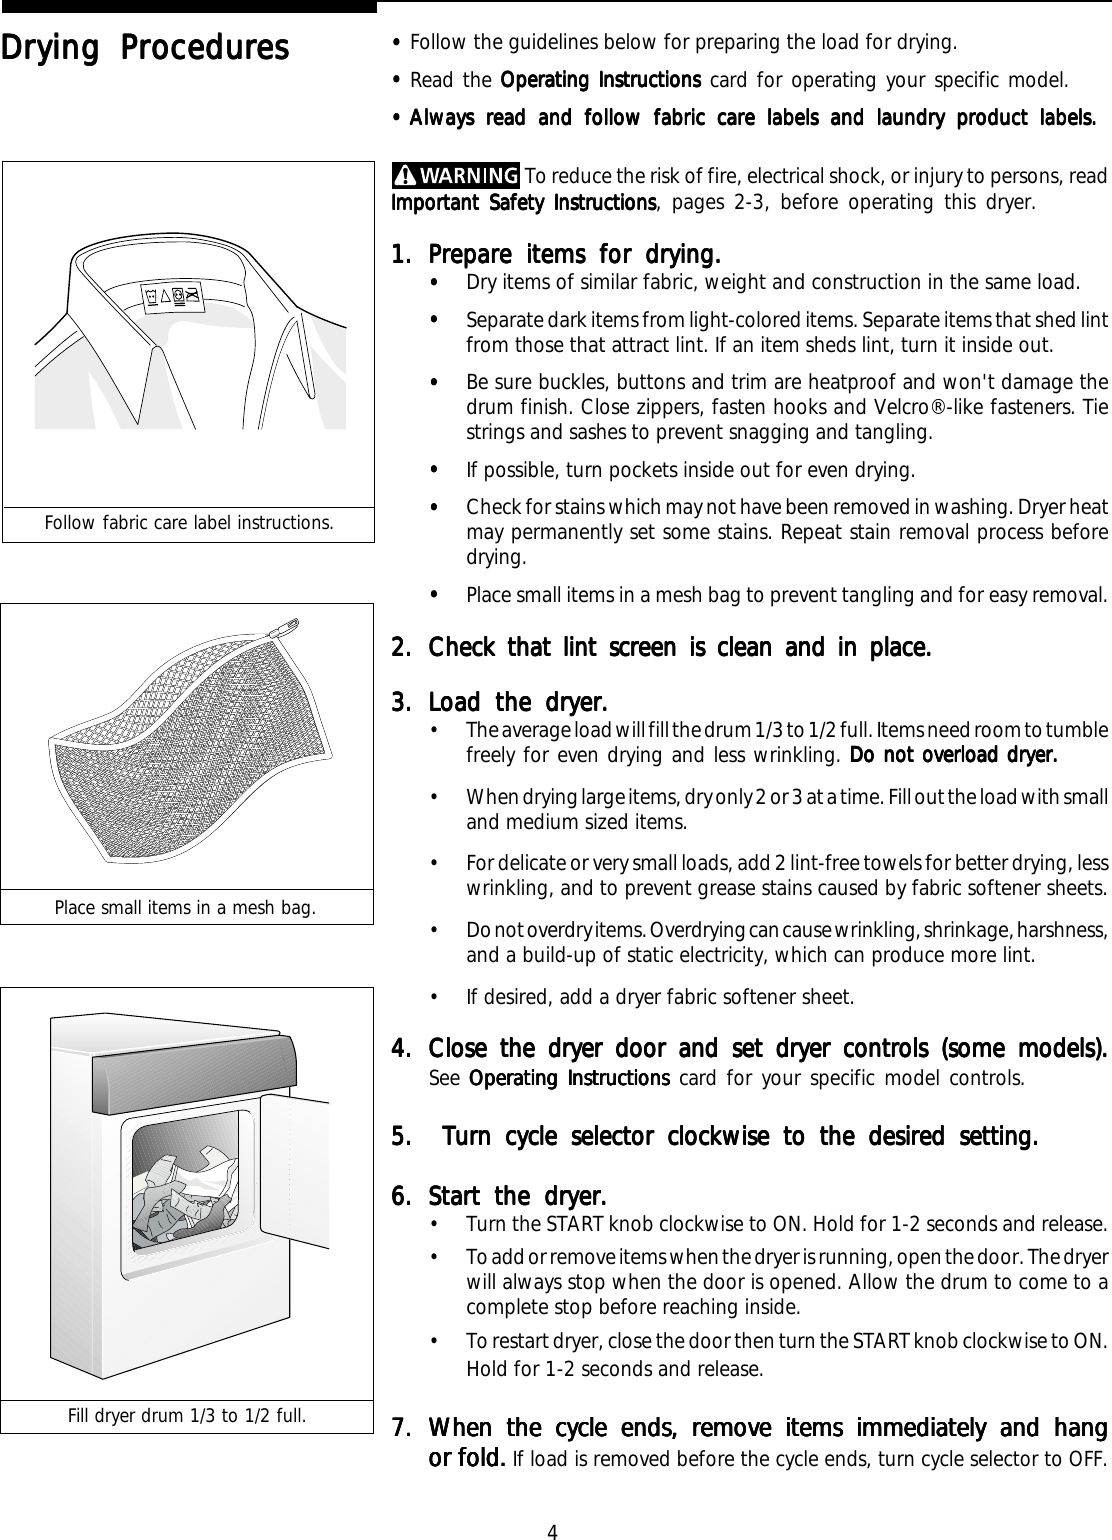 Page 4 of 10 - Electrolux-Gibson Electrolux-Gibson-Stackable-Dryer-Users-Manual- 6279e  Electrolux-gibson-stackable-dryer-users-manual